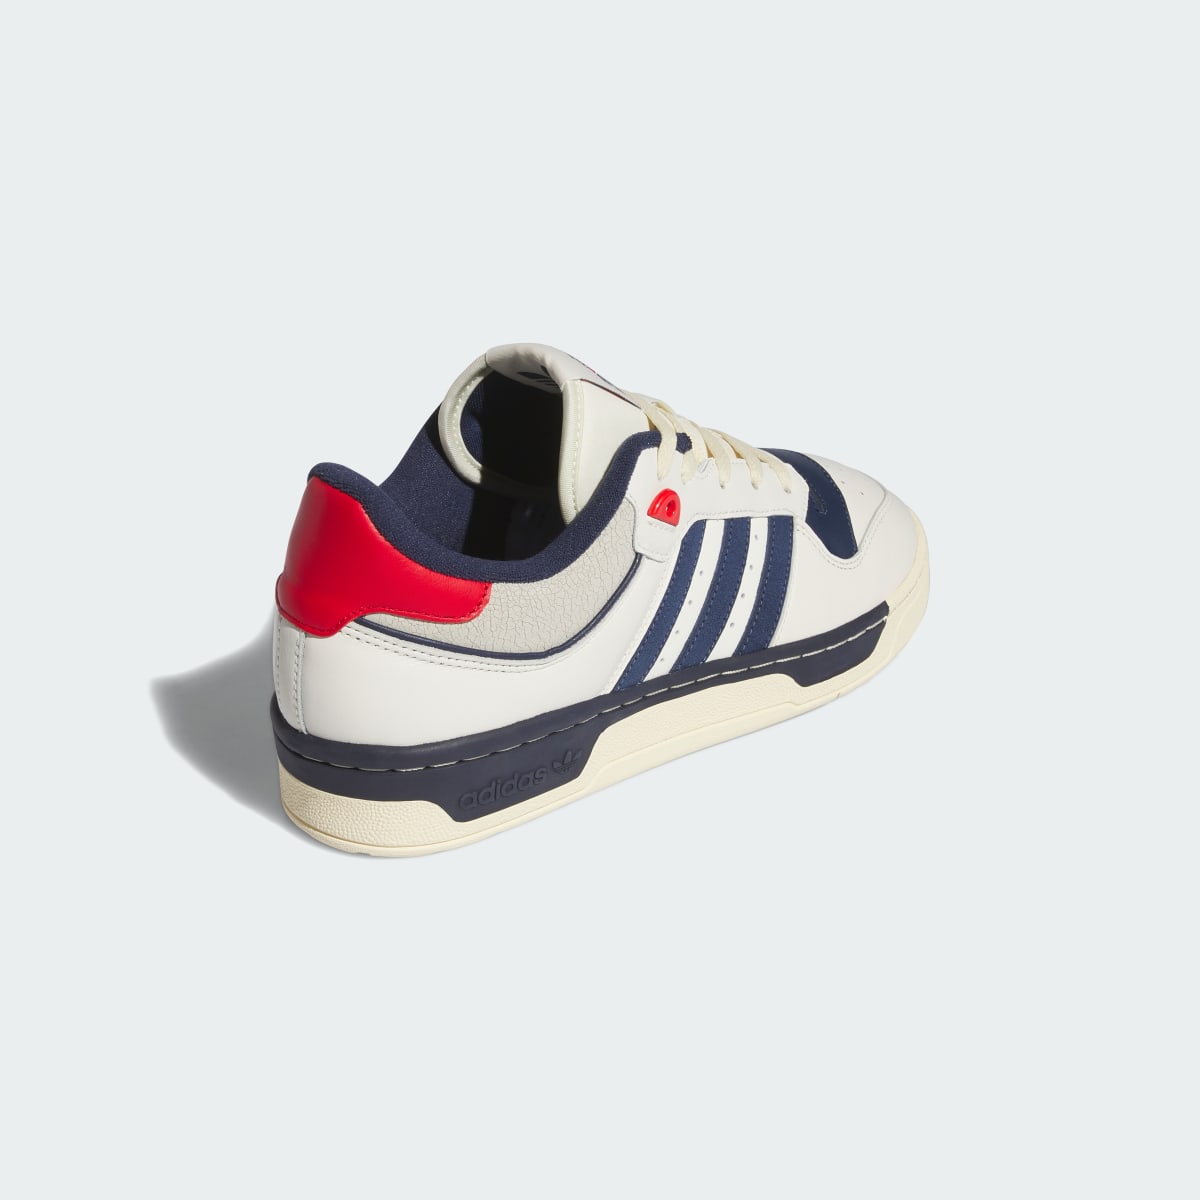 Adidas Rivalry 86 Low Shoes. 6